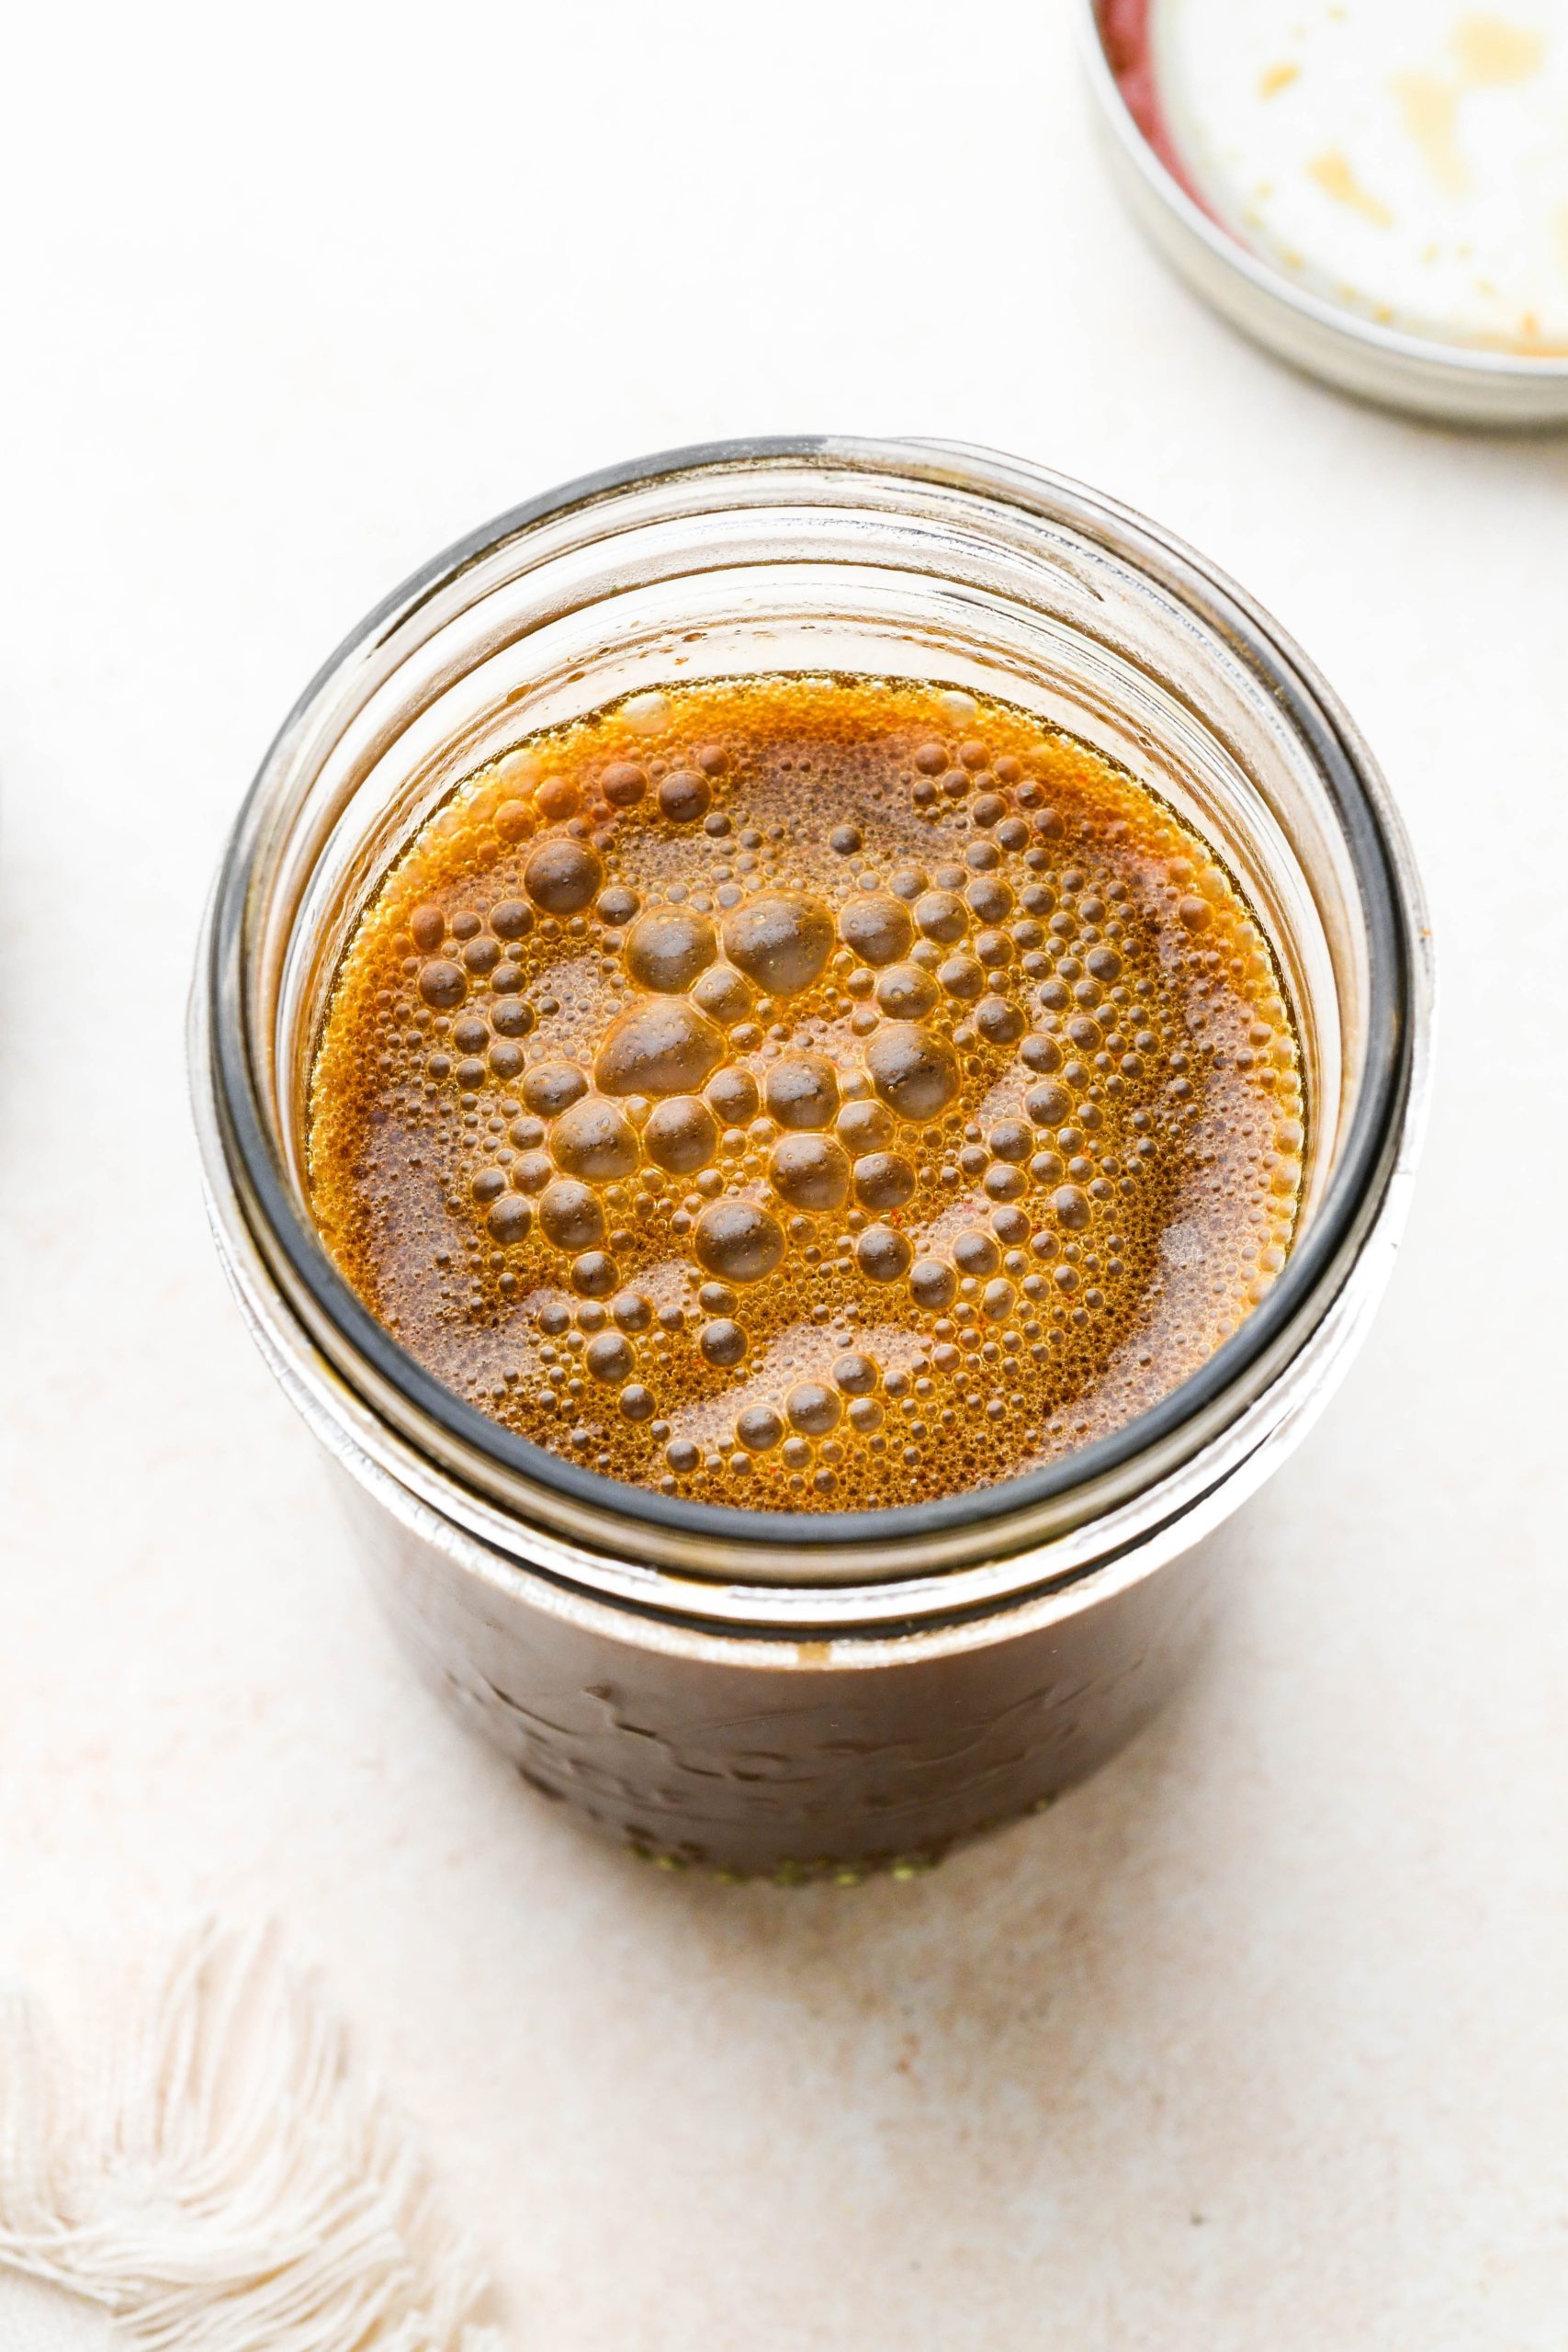 How to make homemade stir fry sauce: Sauce shaken together in a small mason jar.